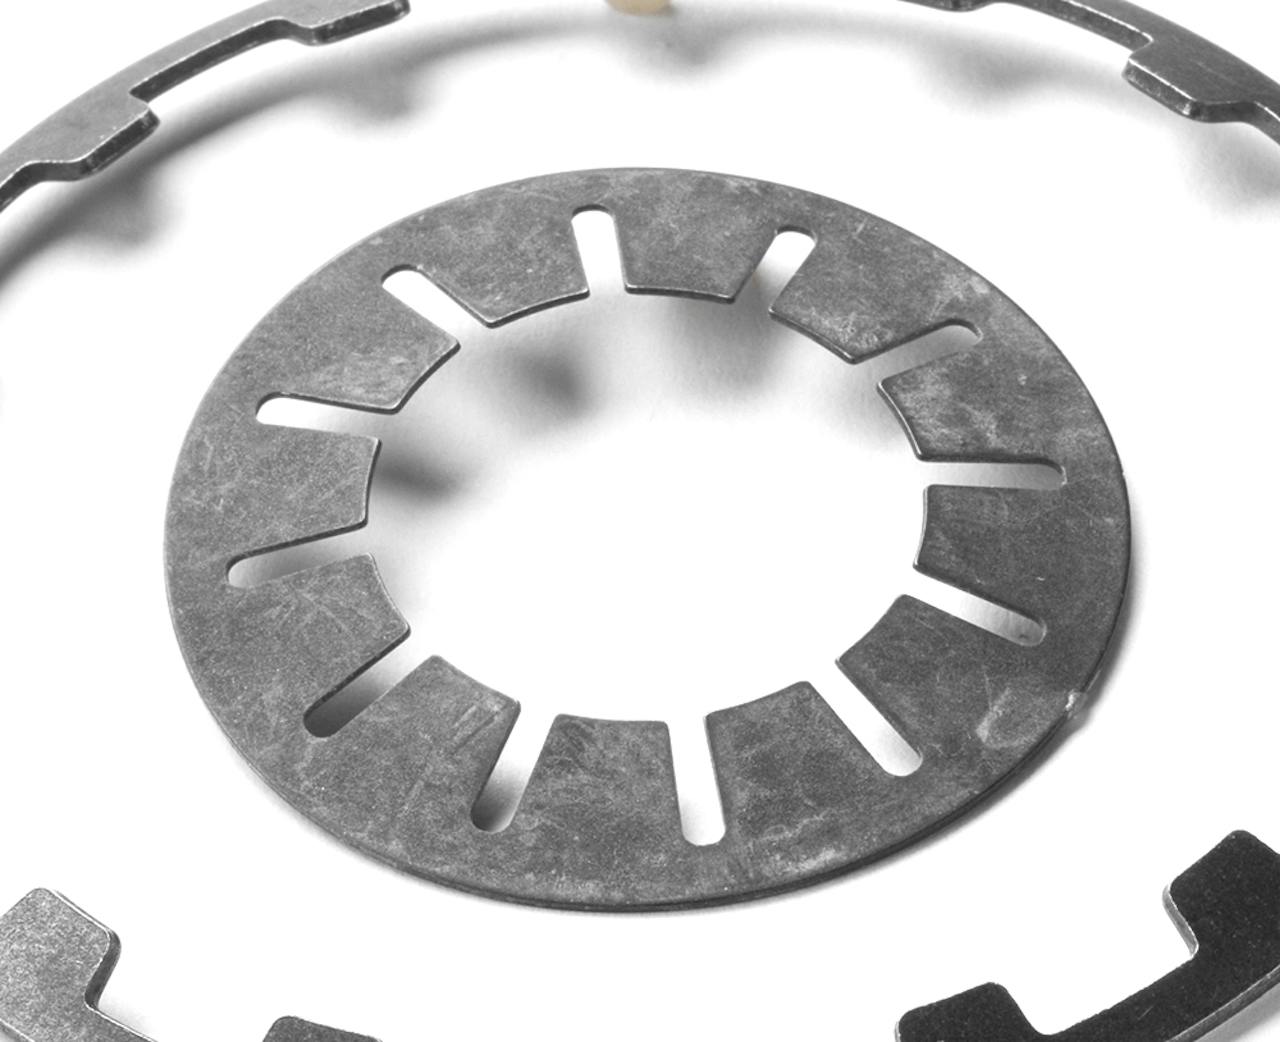 Precision components manufacturing - Slotted disc springs